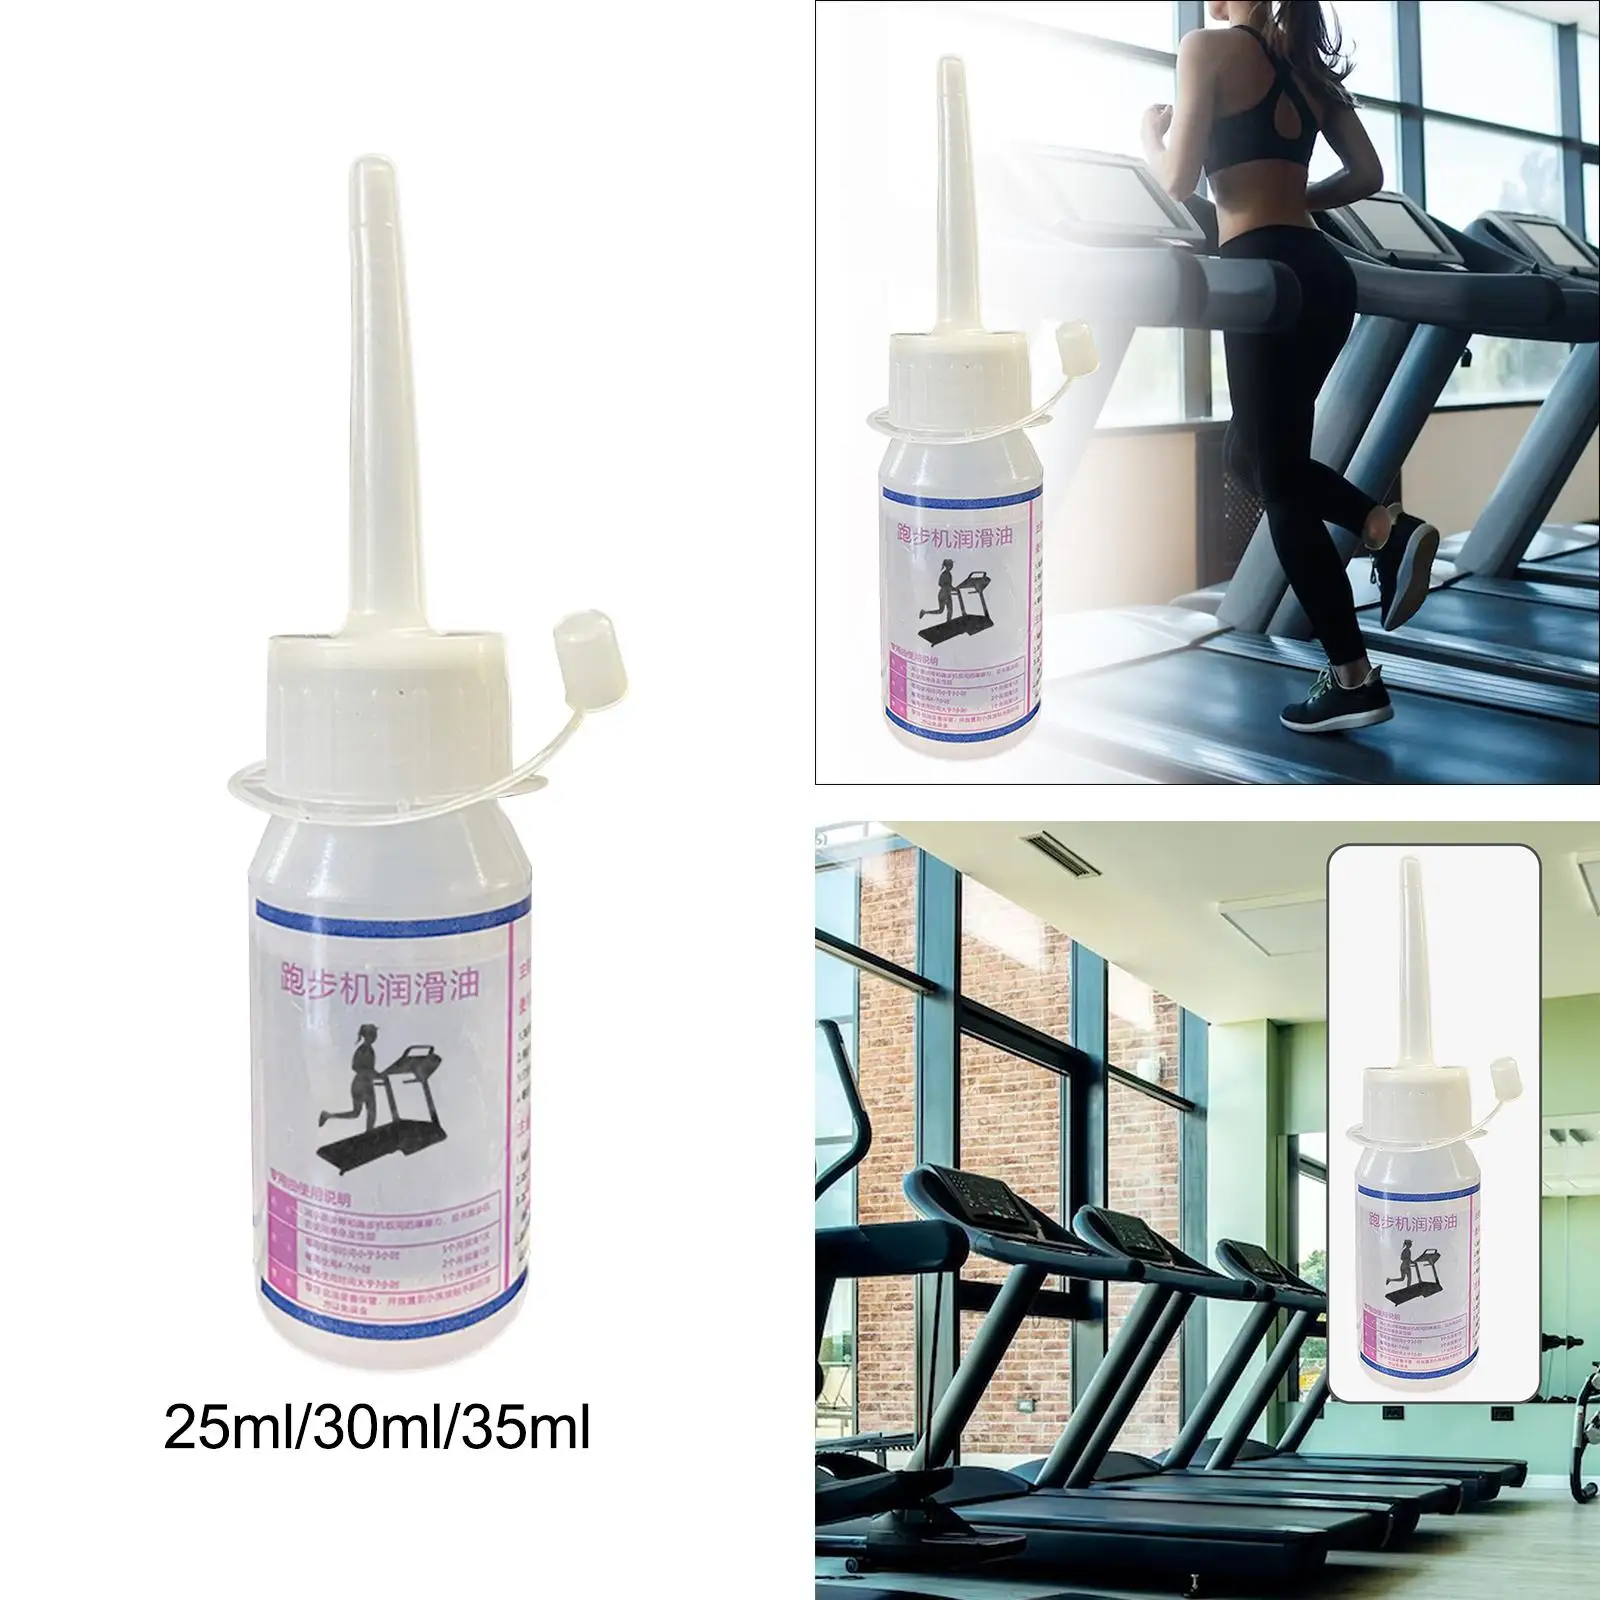 Treadmill Belt Lubricant Fitness Equipment Decrease The Load of The Motor Sports Home Gym Repairing Sewing Machine Lubricant Oil